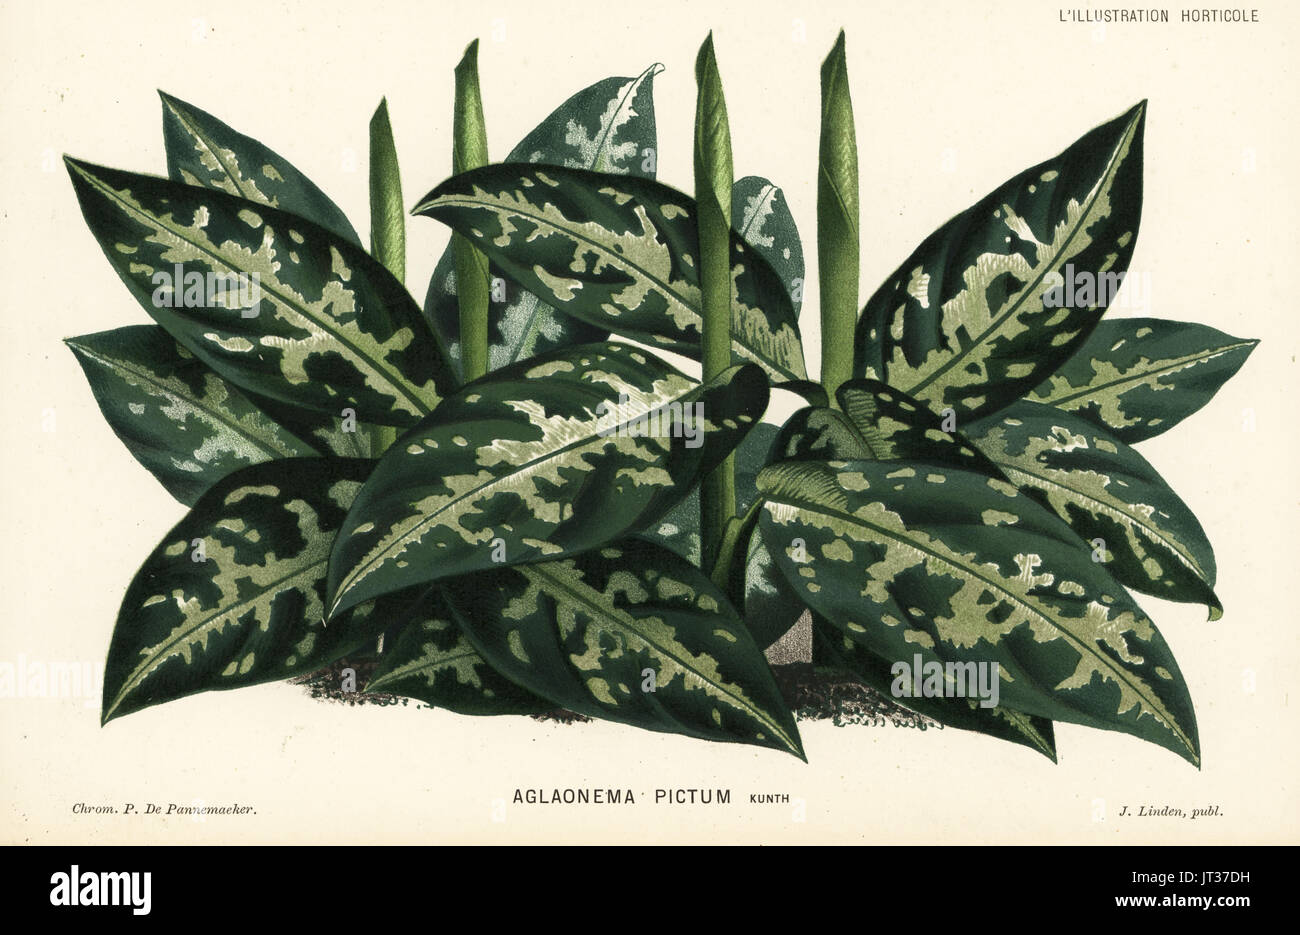 Chinese evergreen, Aglaonema pictum. Chromolithograph by P. de Pannemaeker from Jean Linden's l'Illustration Horticole, Brussels, 1882. Stock Photo